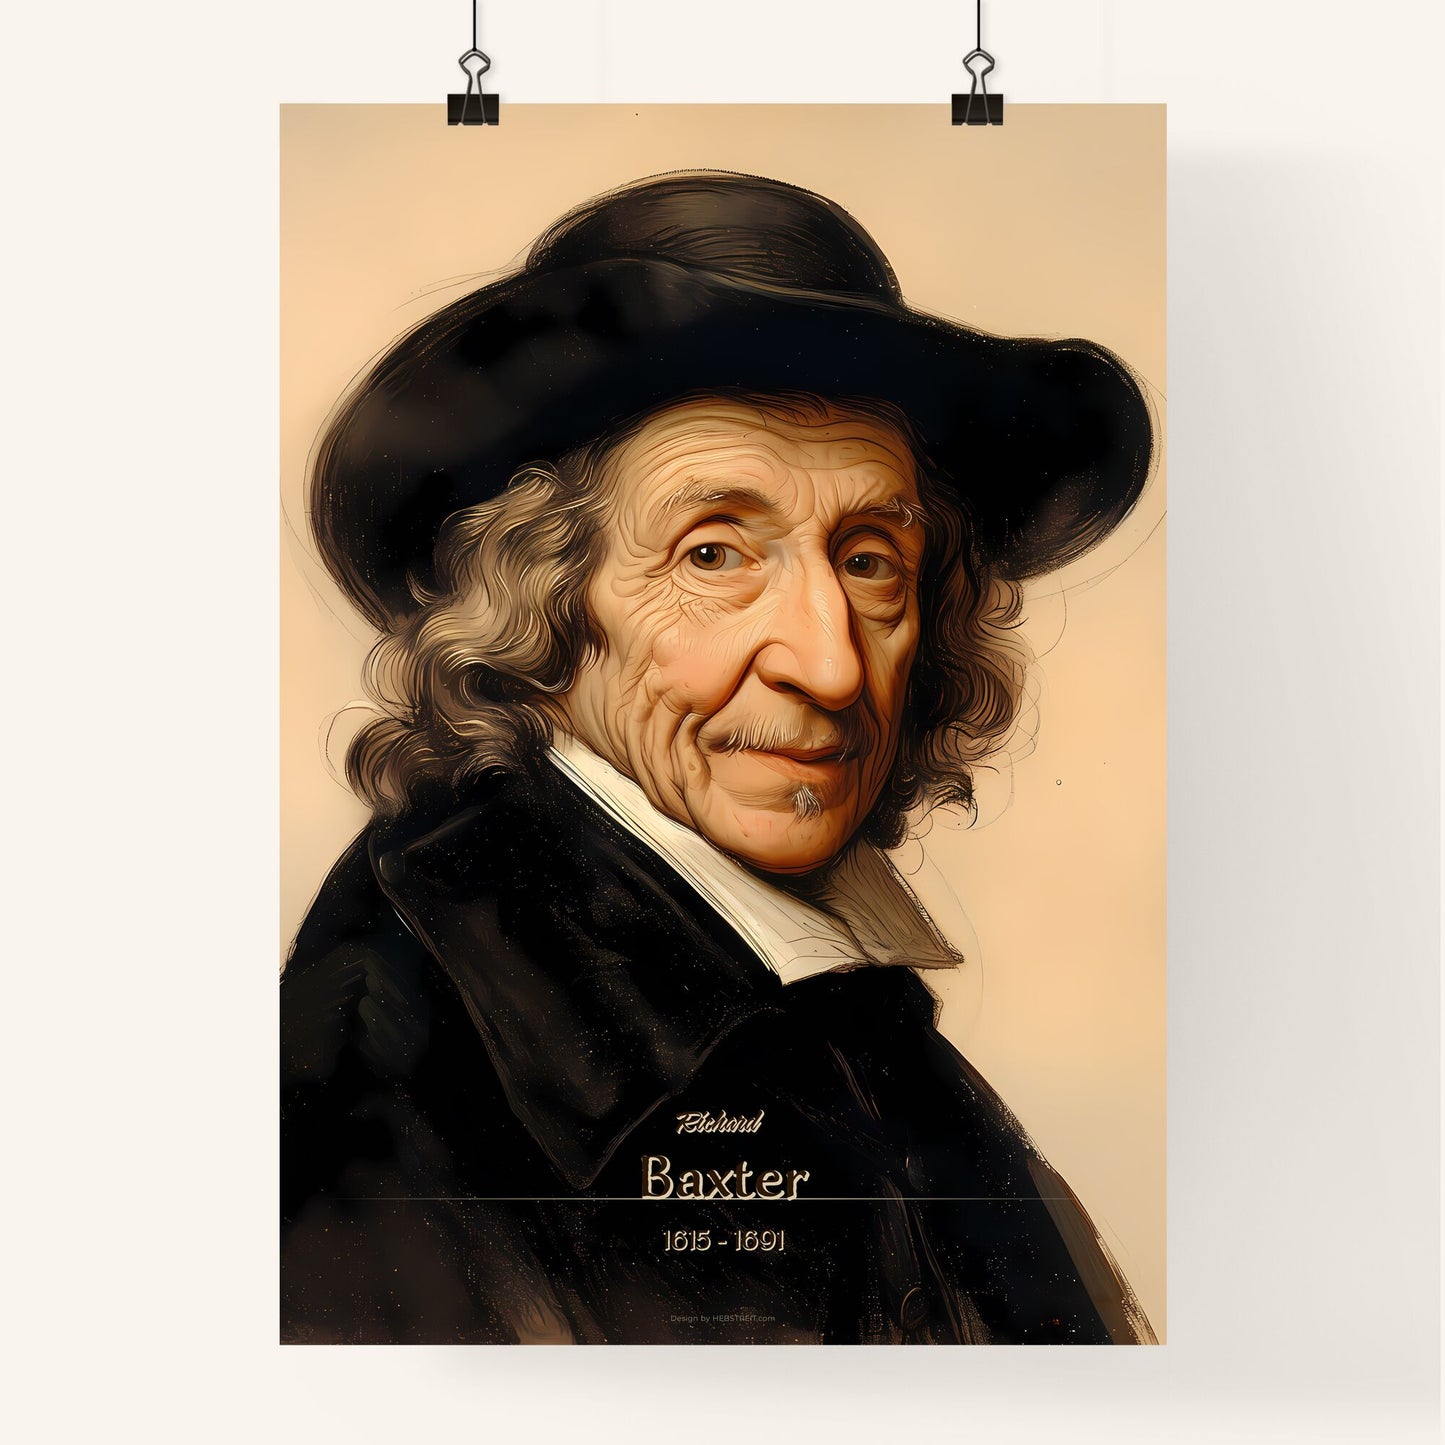 Richard, Baxter, 1615 - 1691, A Poster of a man in a hat Default Title